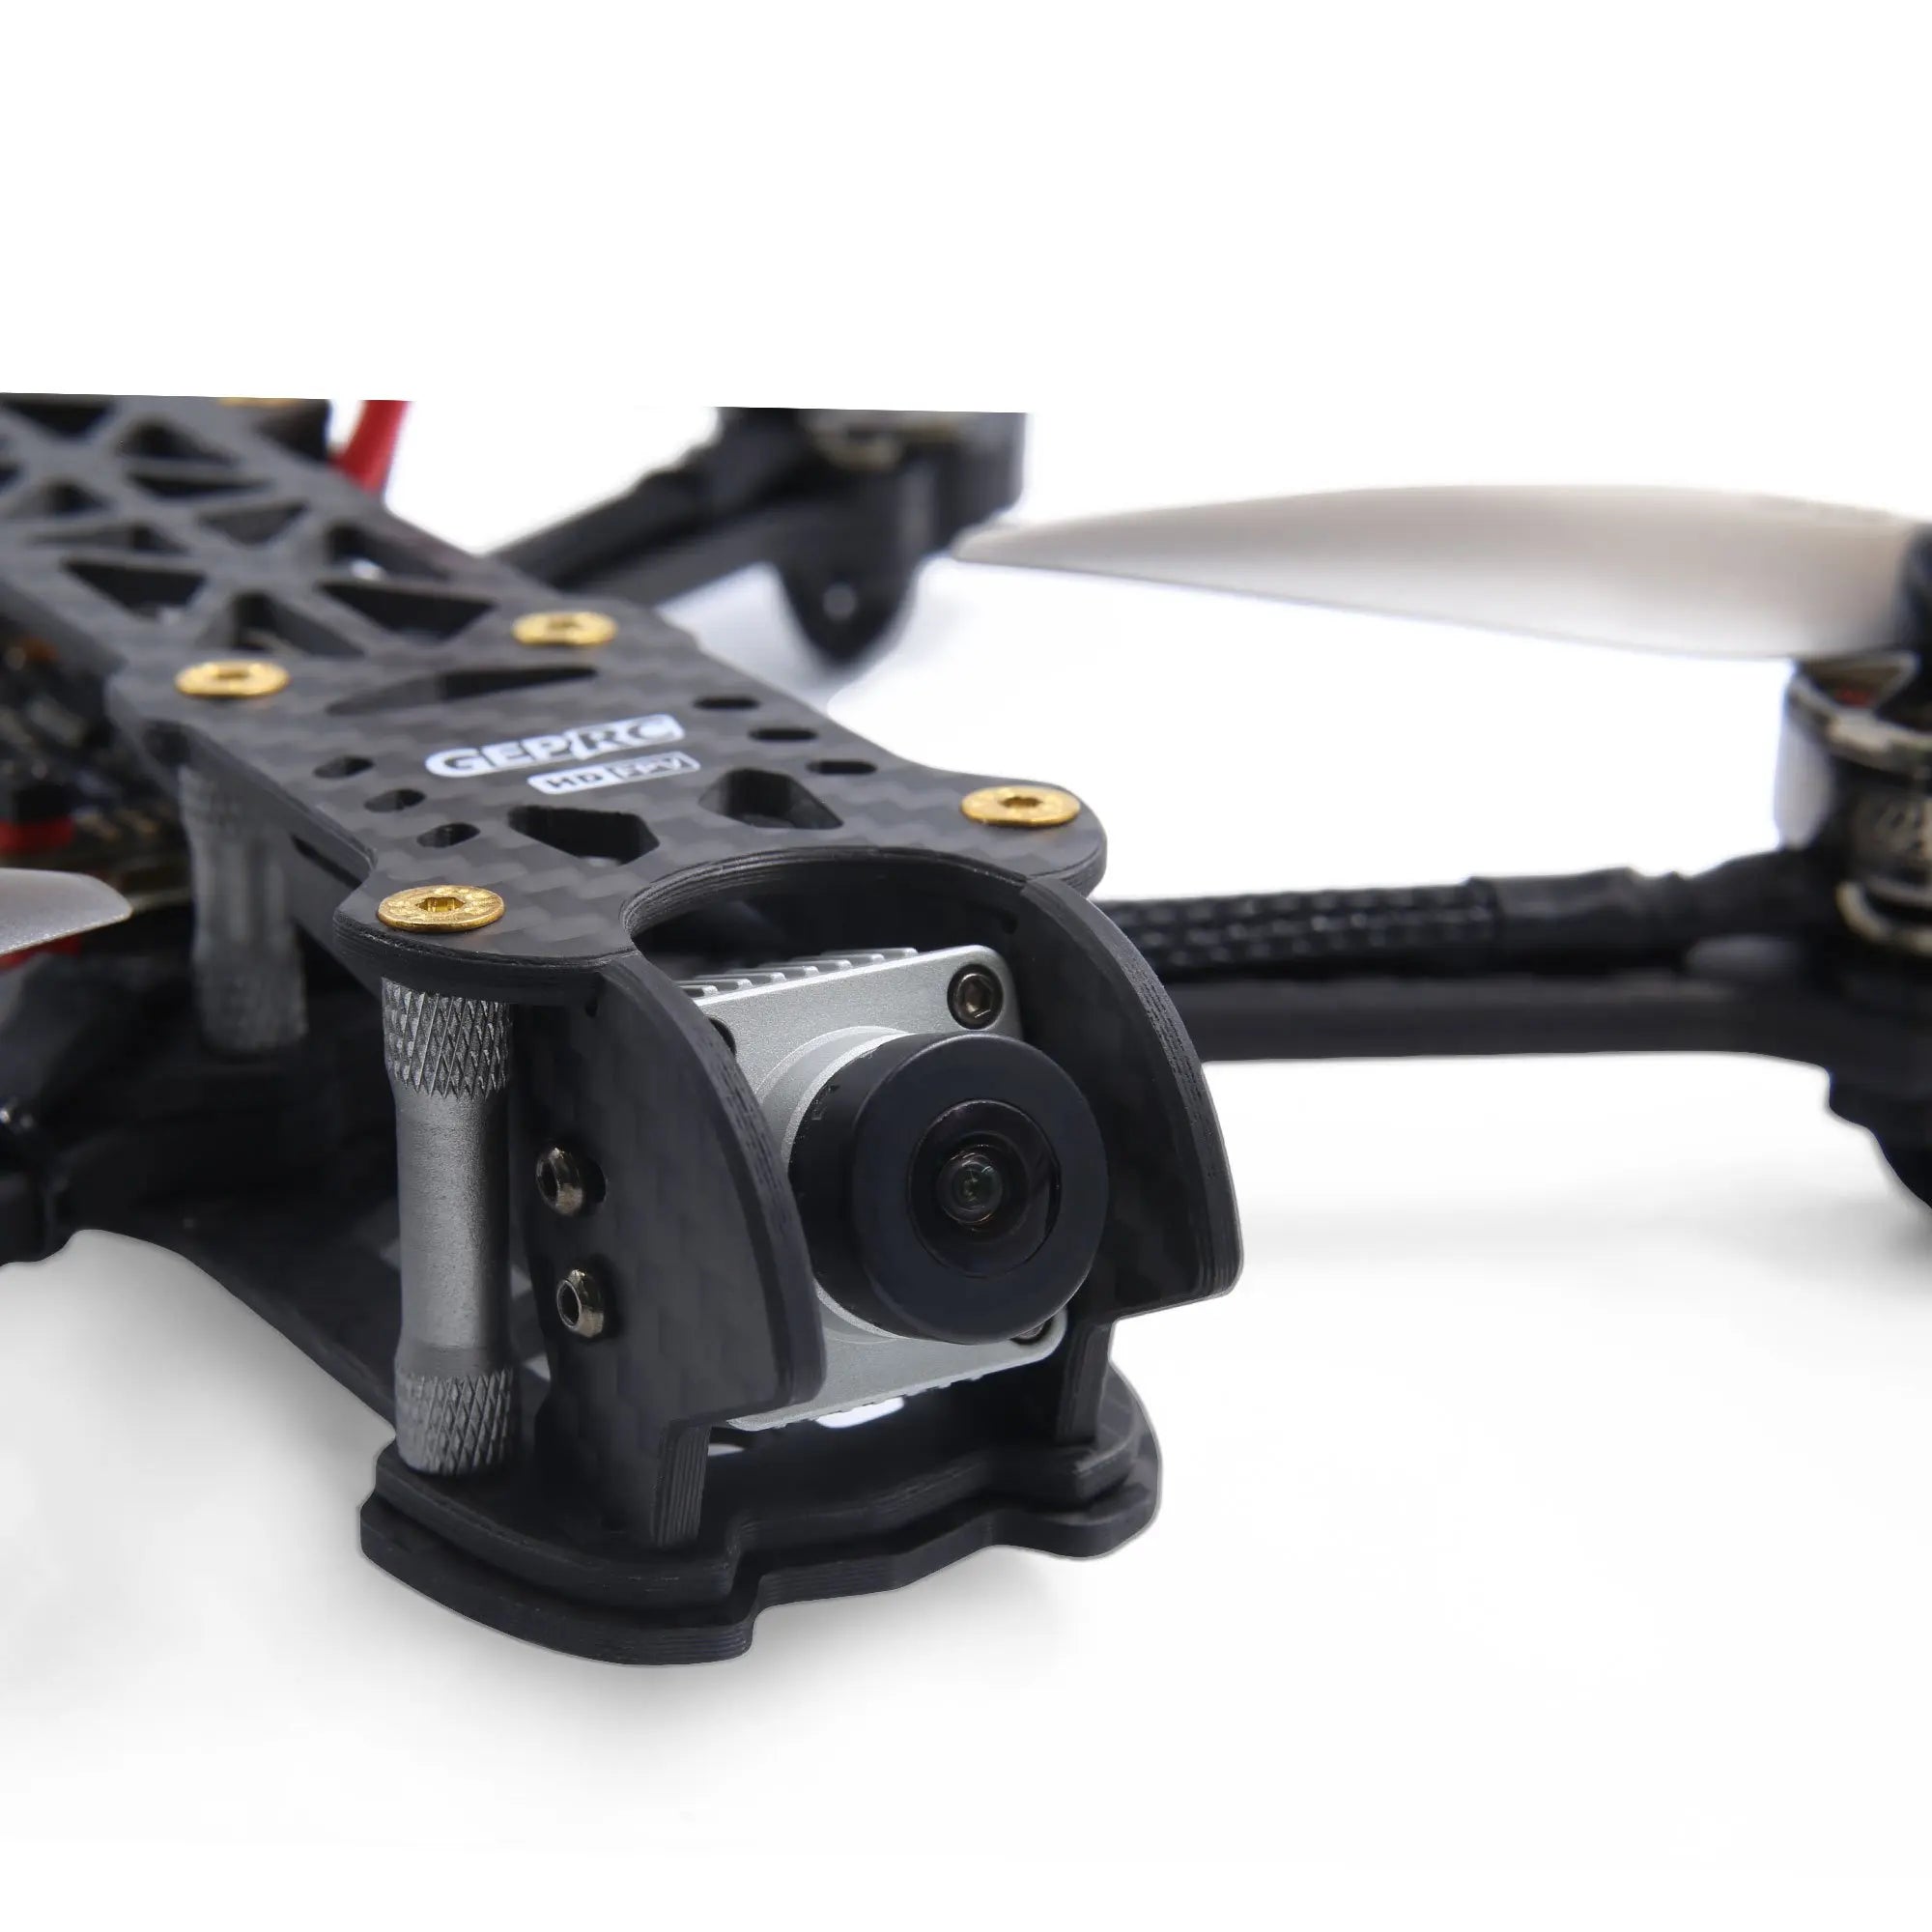 GEPRC MARK4 FPV Drone, lower latency rates within 28 ms, a 4km maximum transmission range .